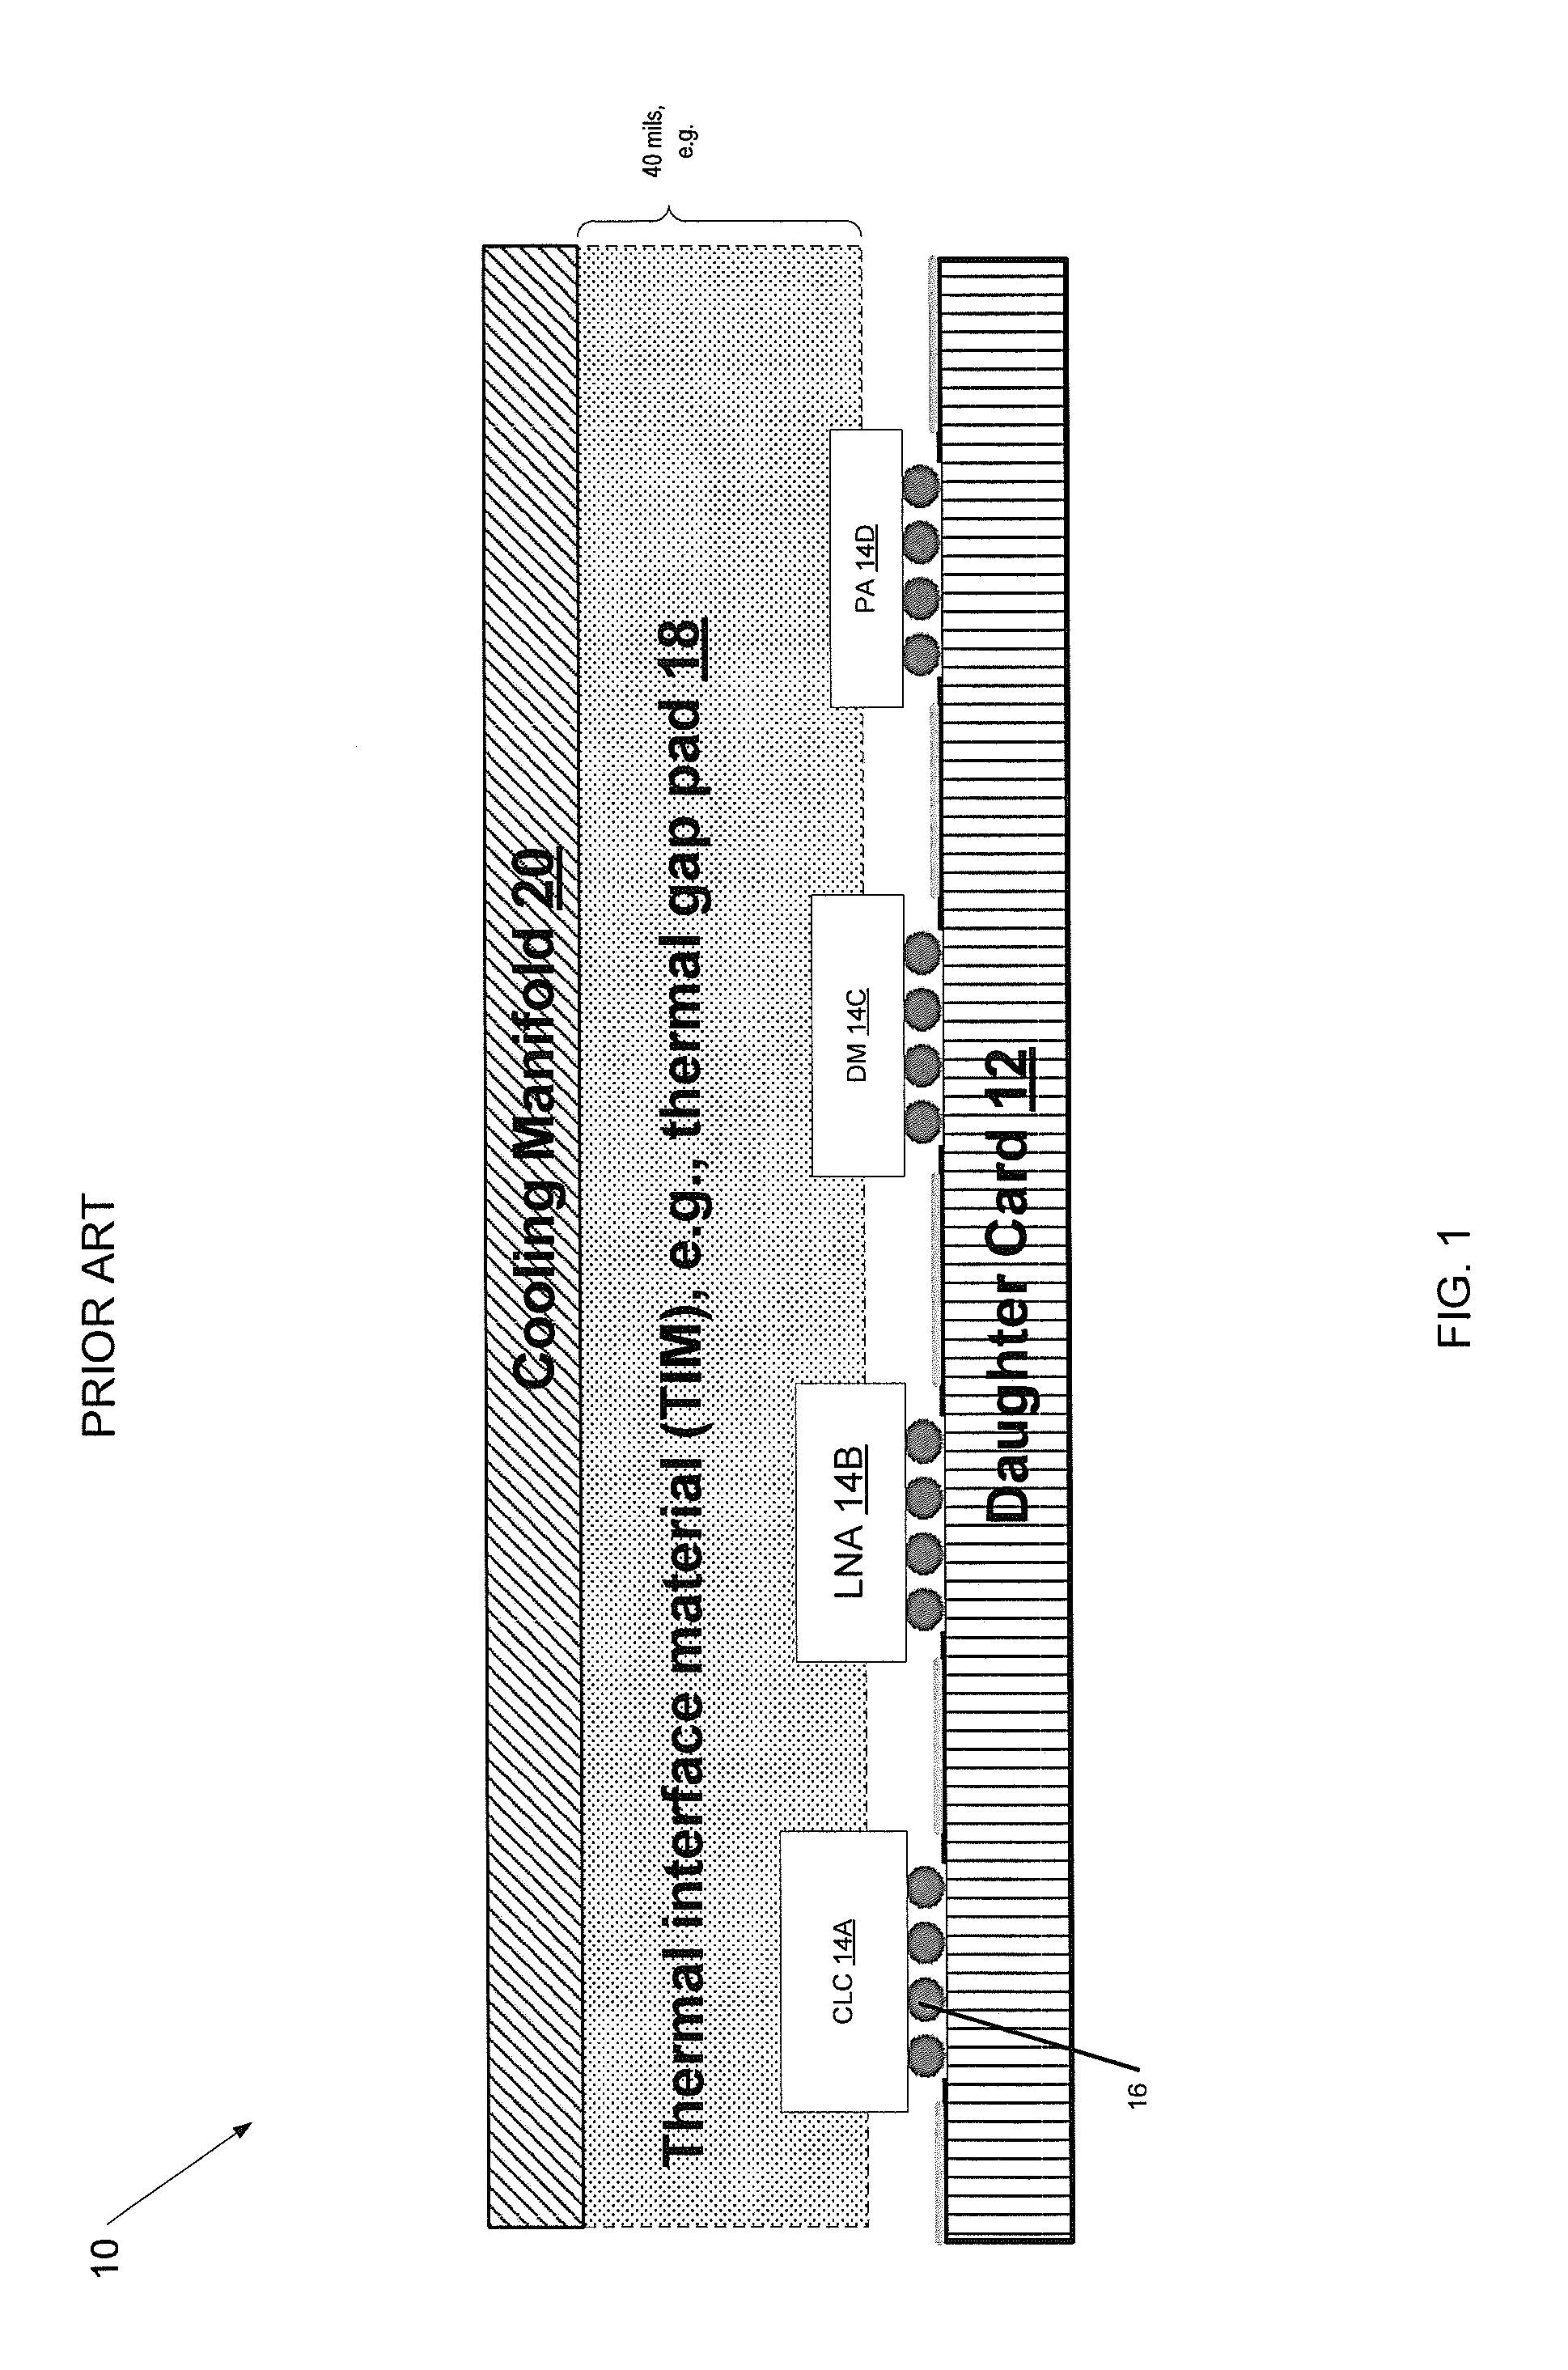 Conduction cooling of multi-channel flip chip based panel array circuits